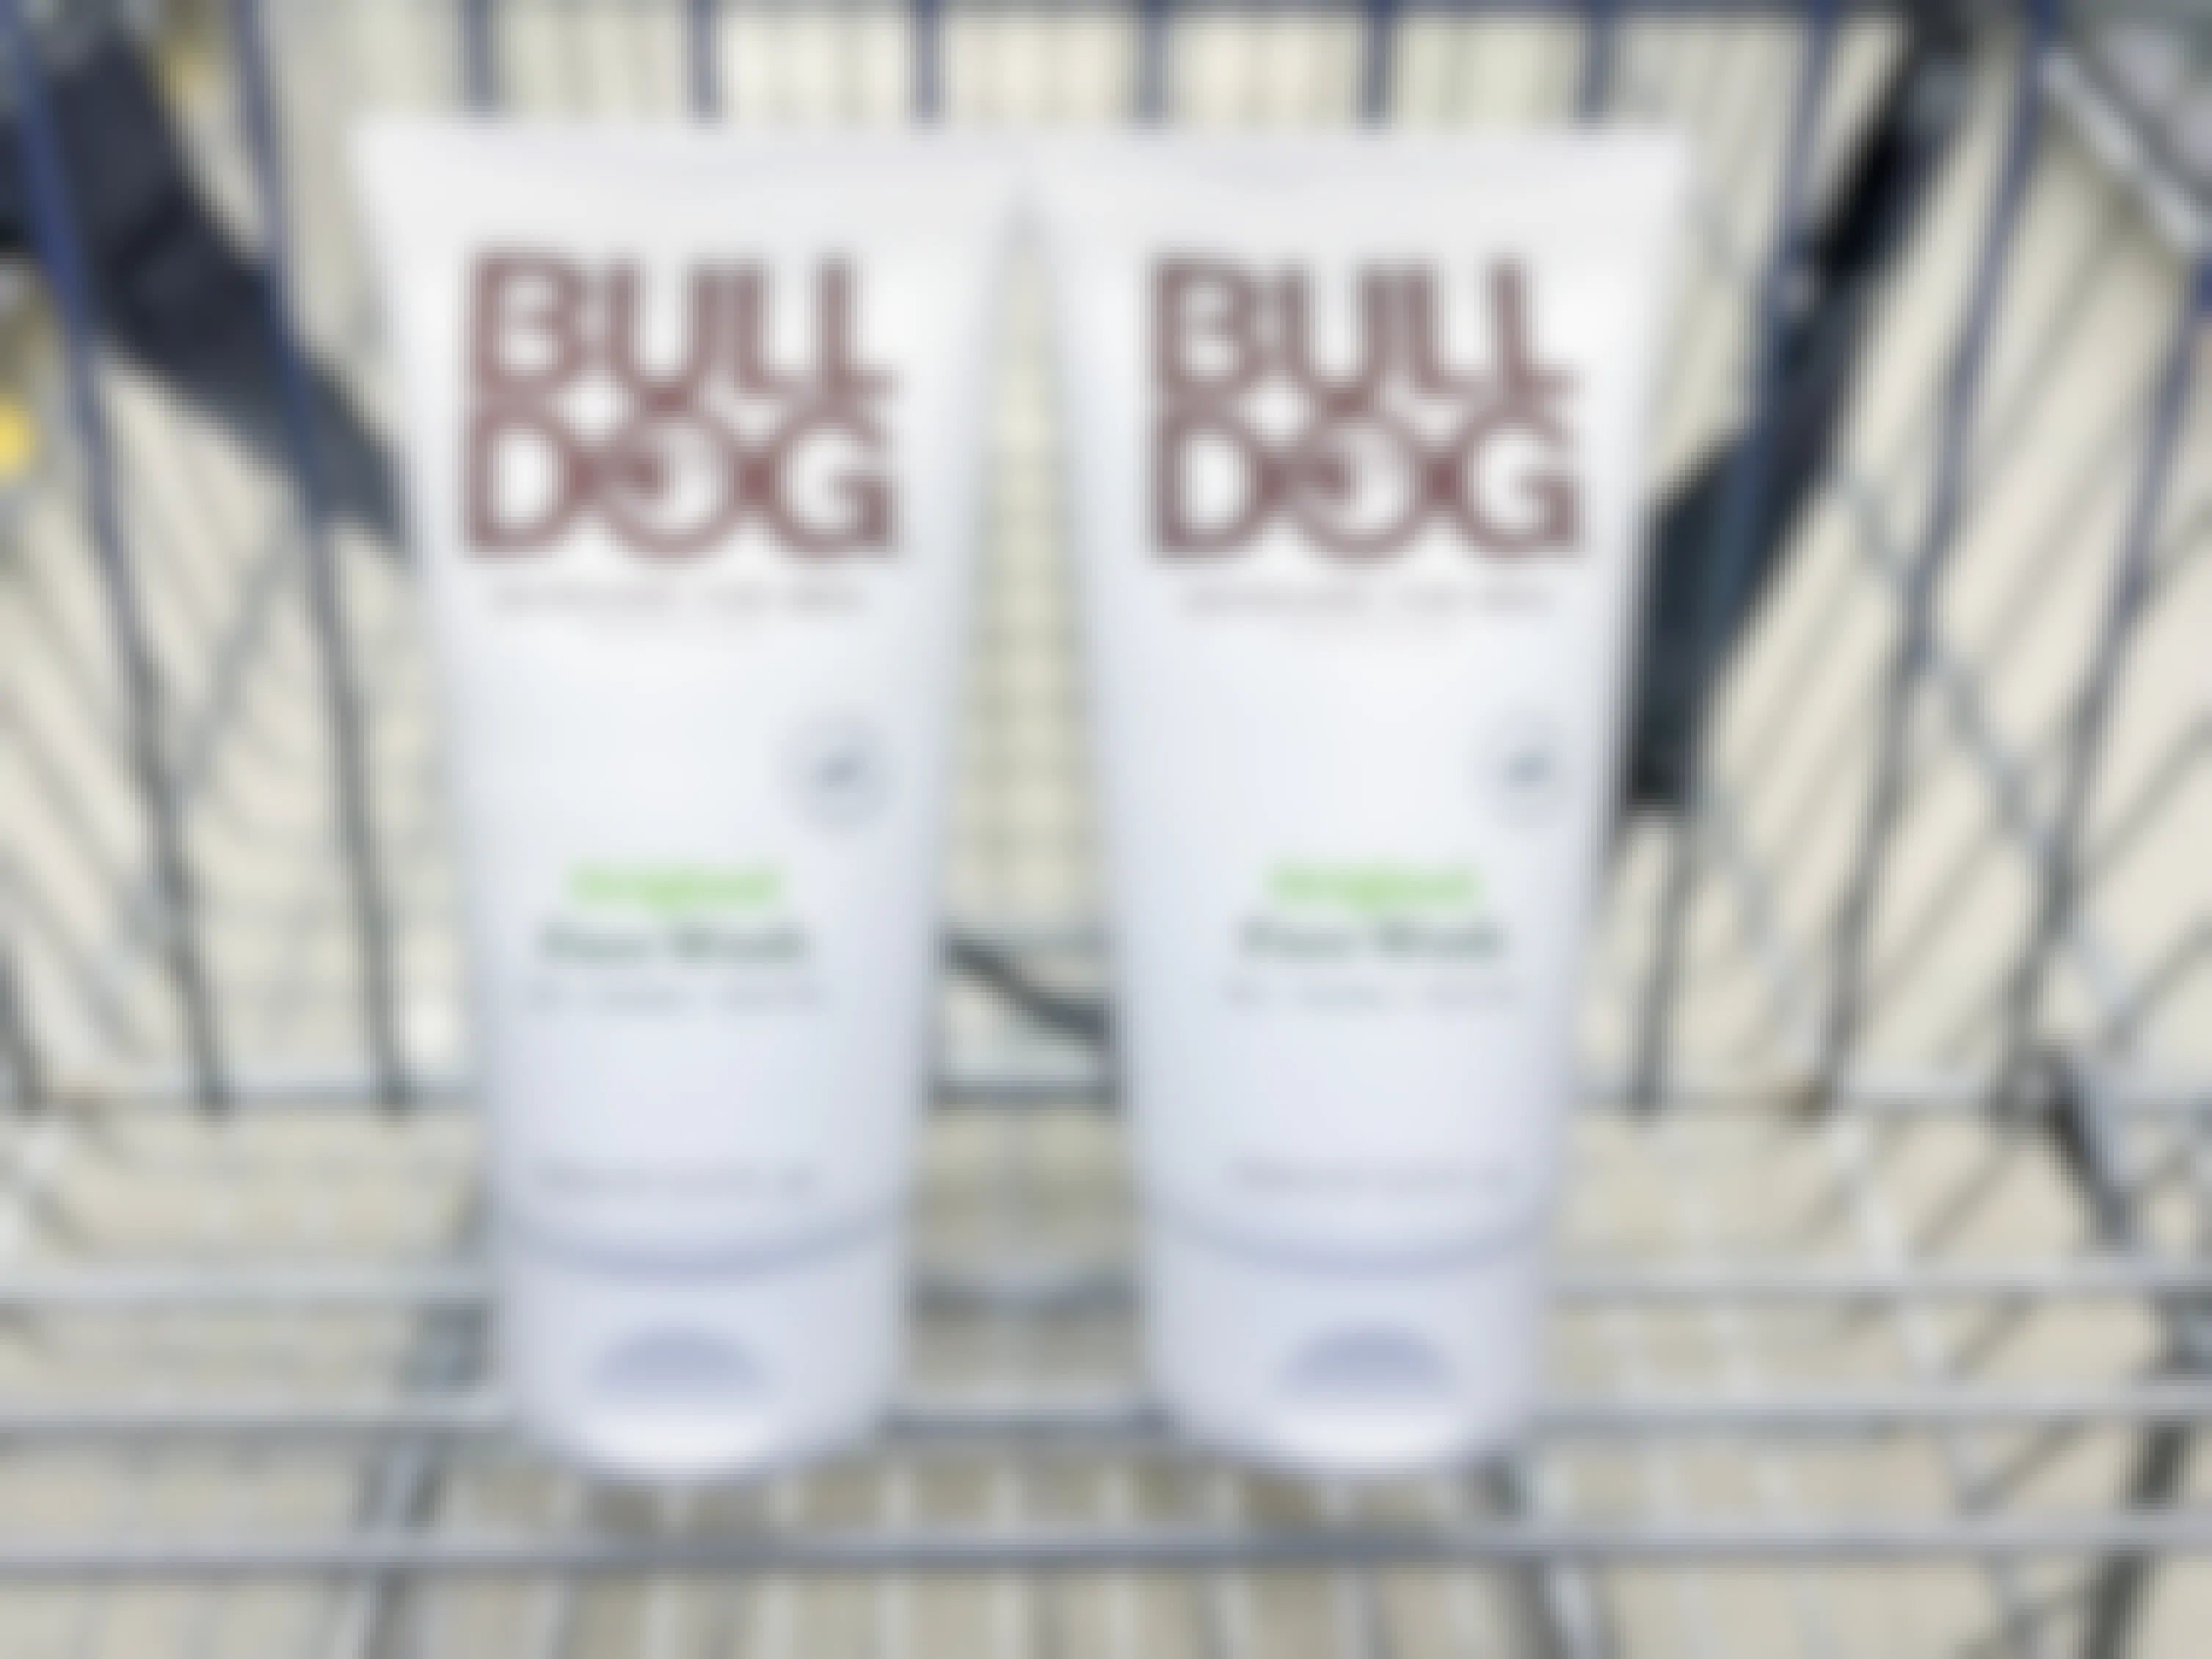 two bottles of bulldog skincare face wash in a cart